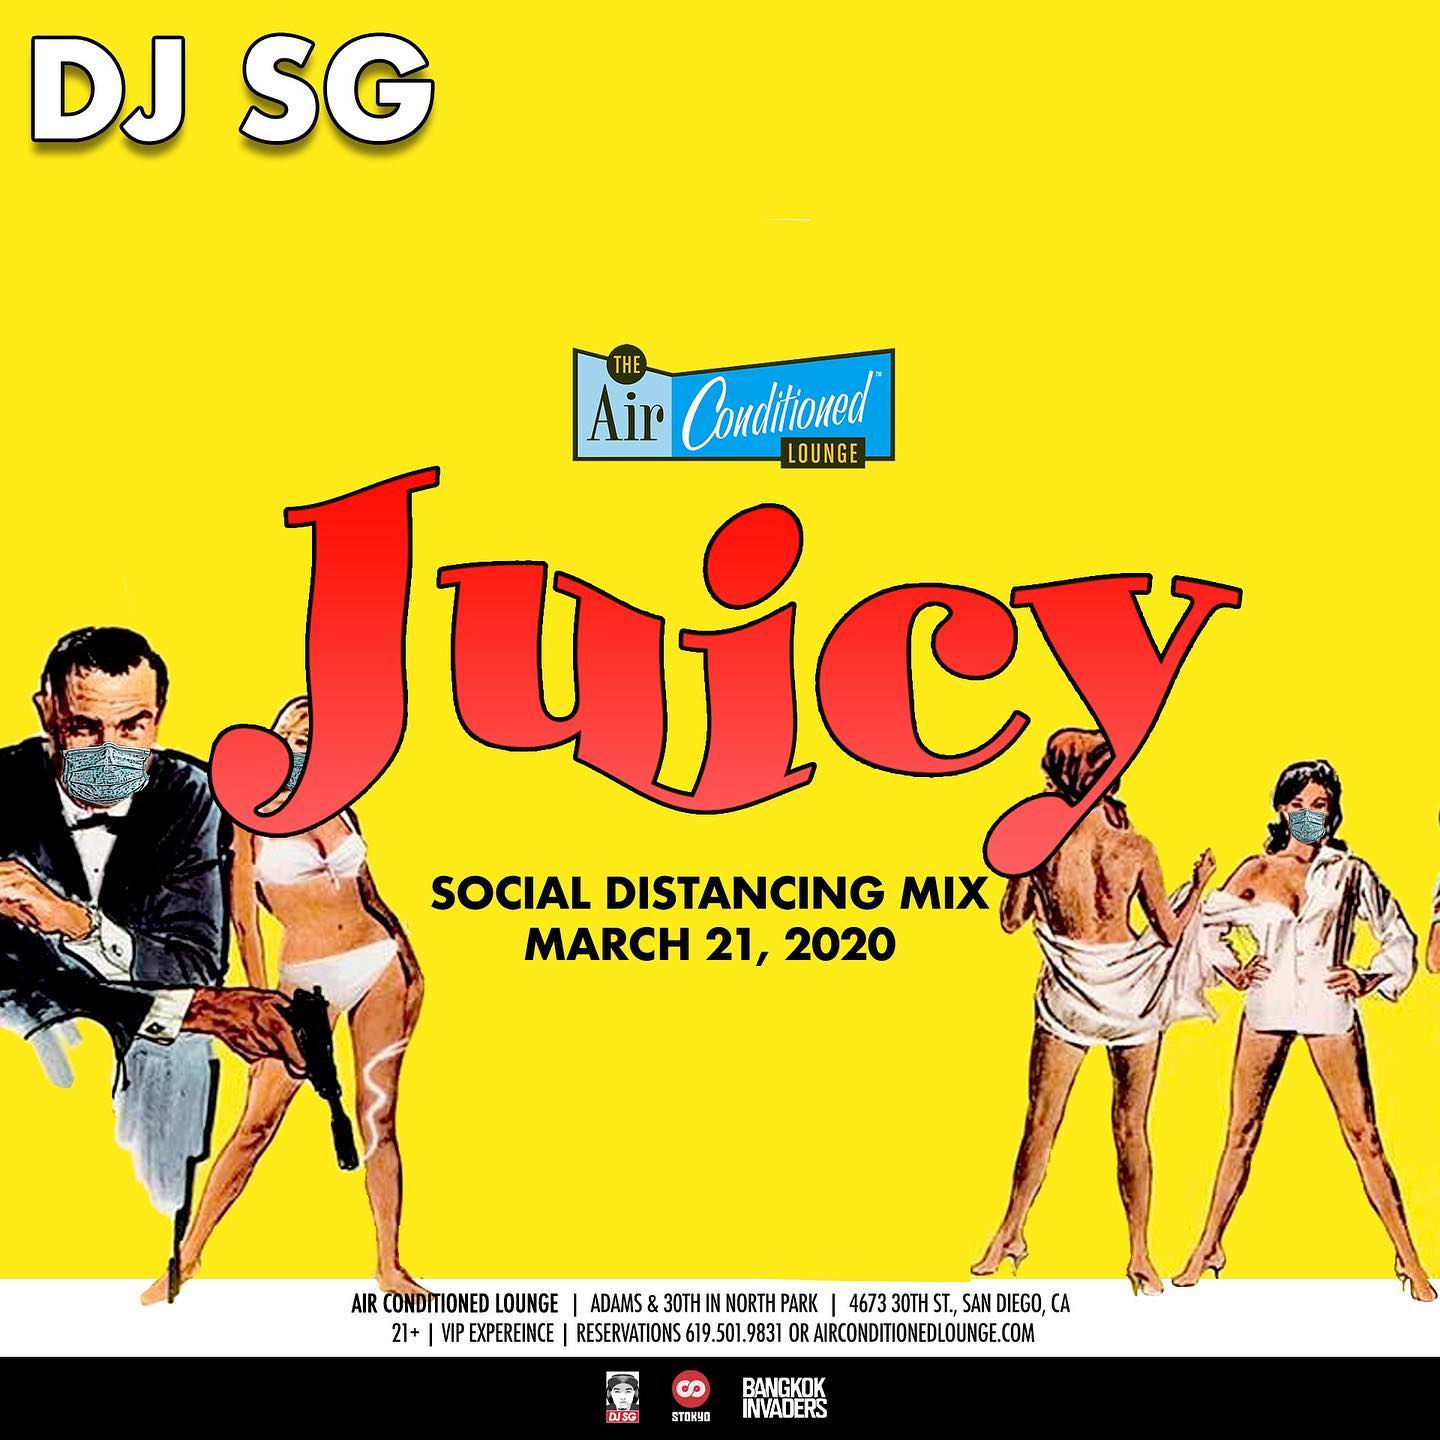 DJ SG Air Conditioned Lounge JUICY Social Distancing Mix 3/21/2020